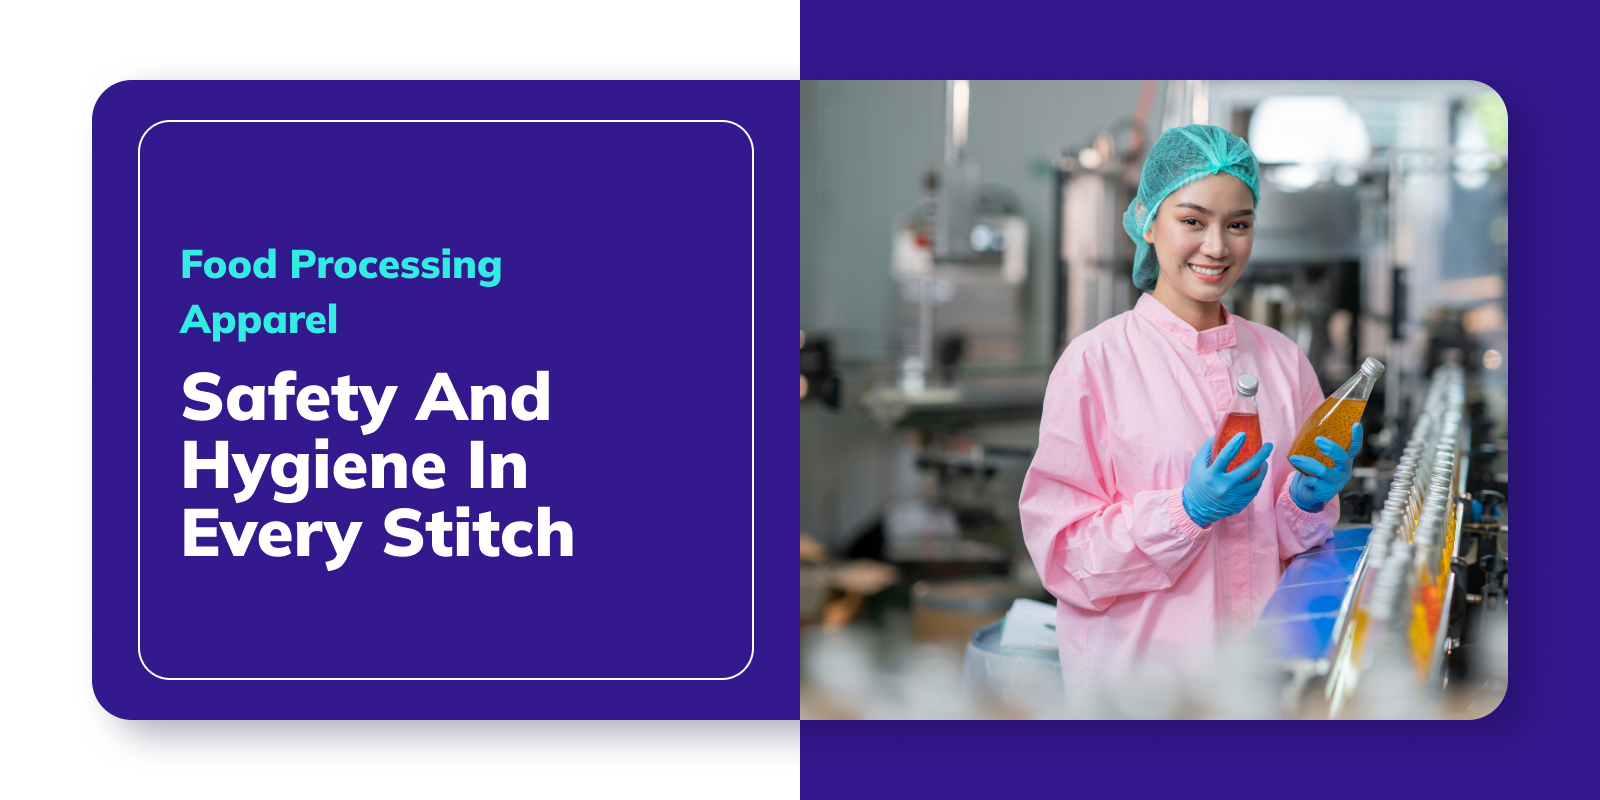 Food Processing Apparel: Safety and Hygiene in Every Stitch